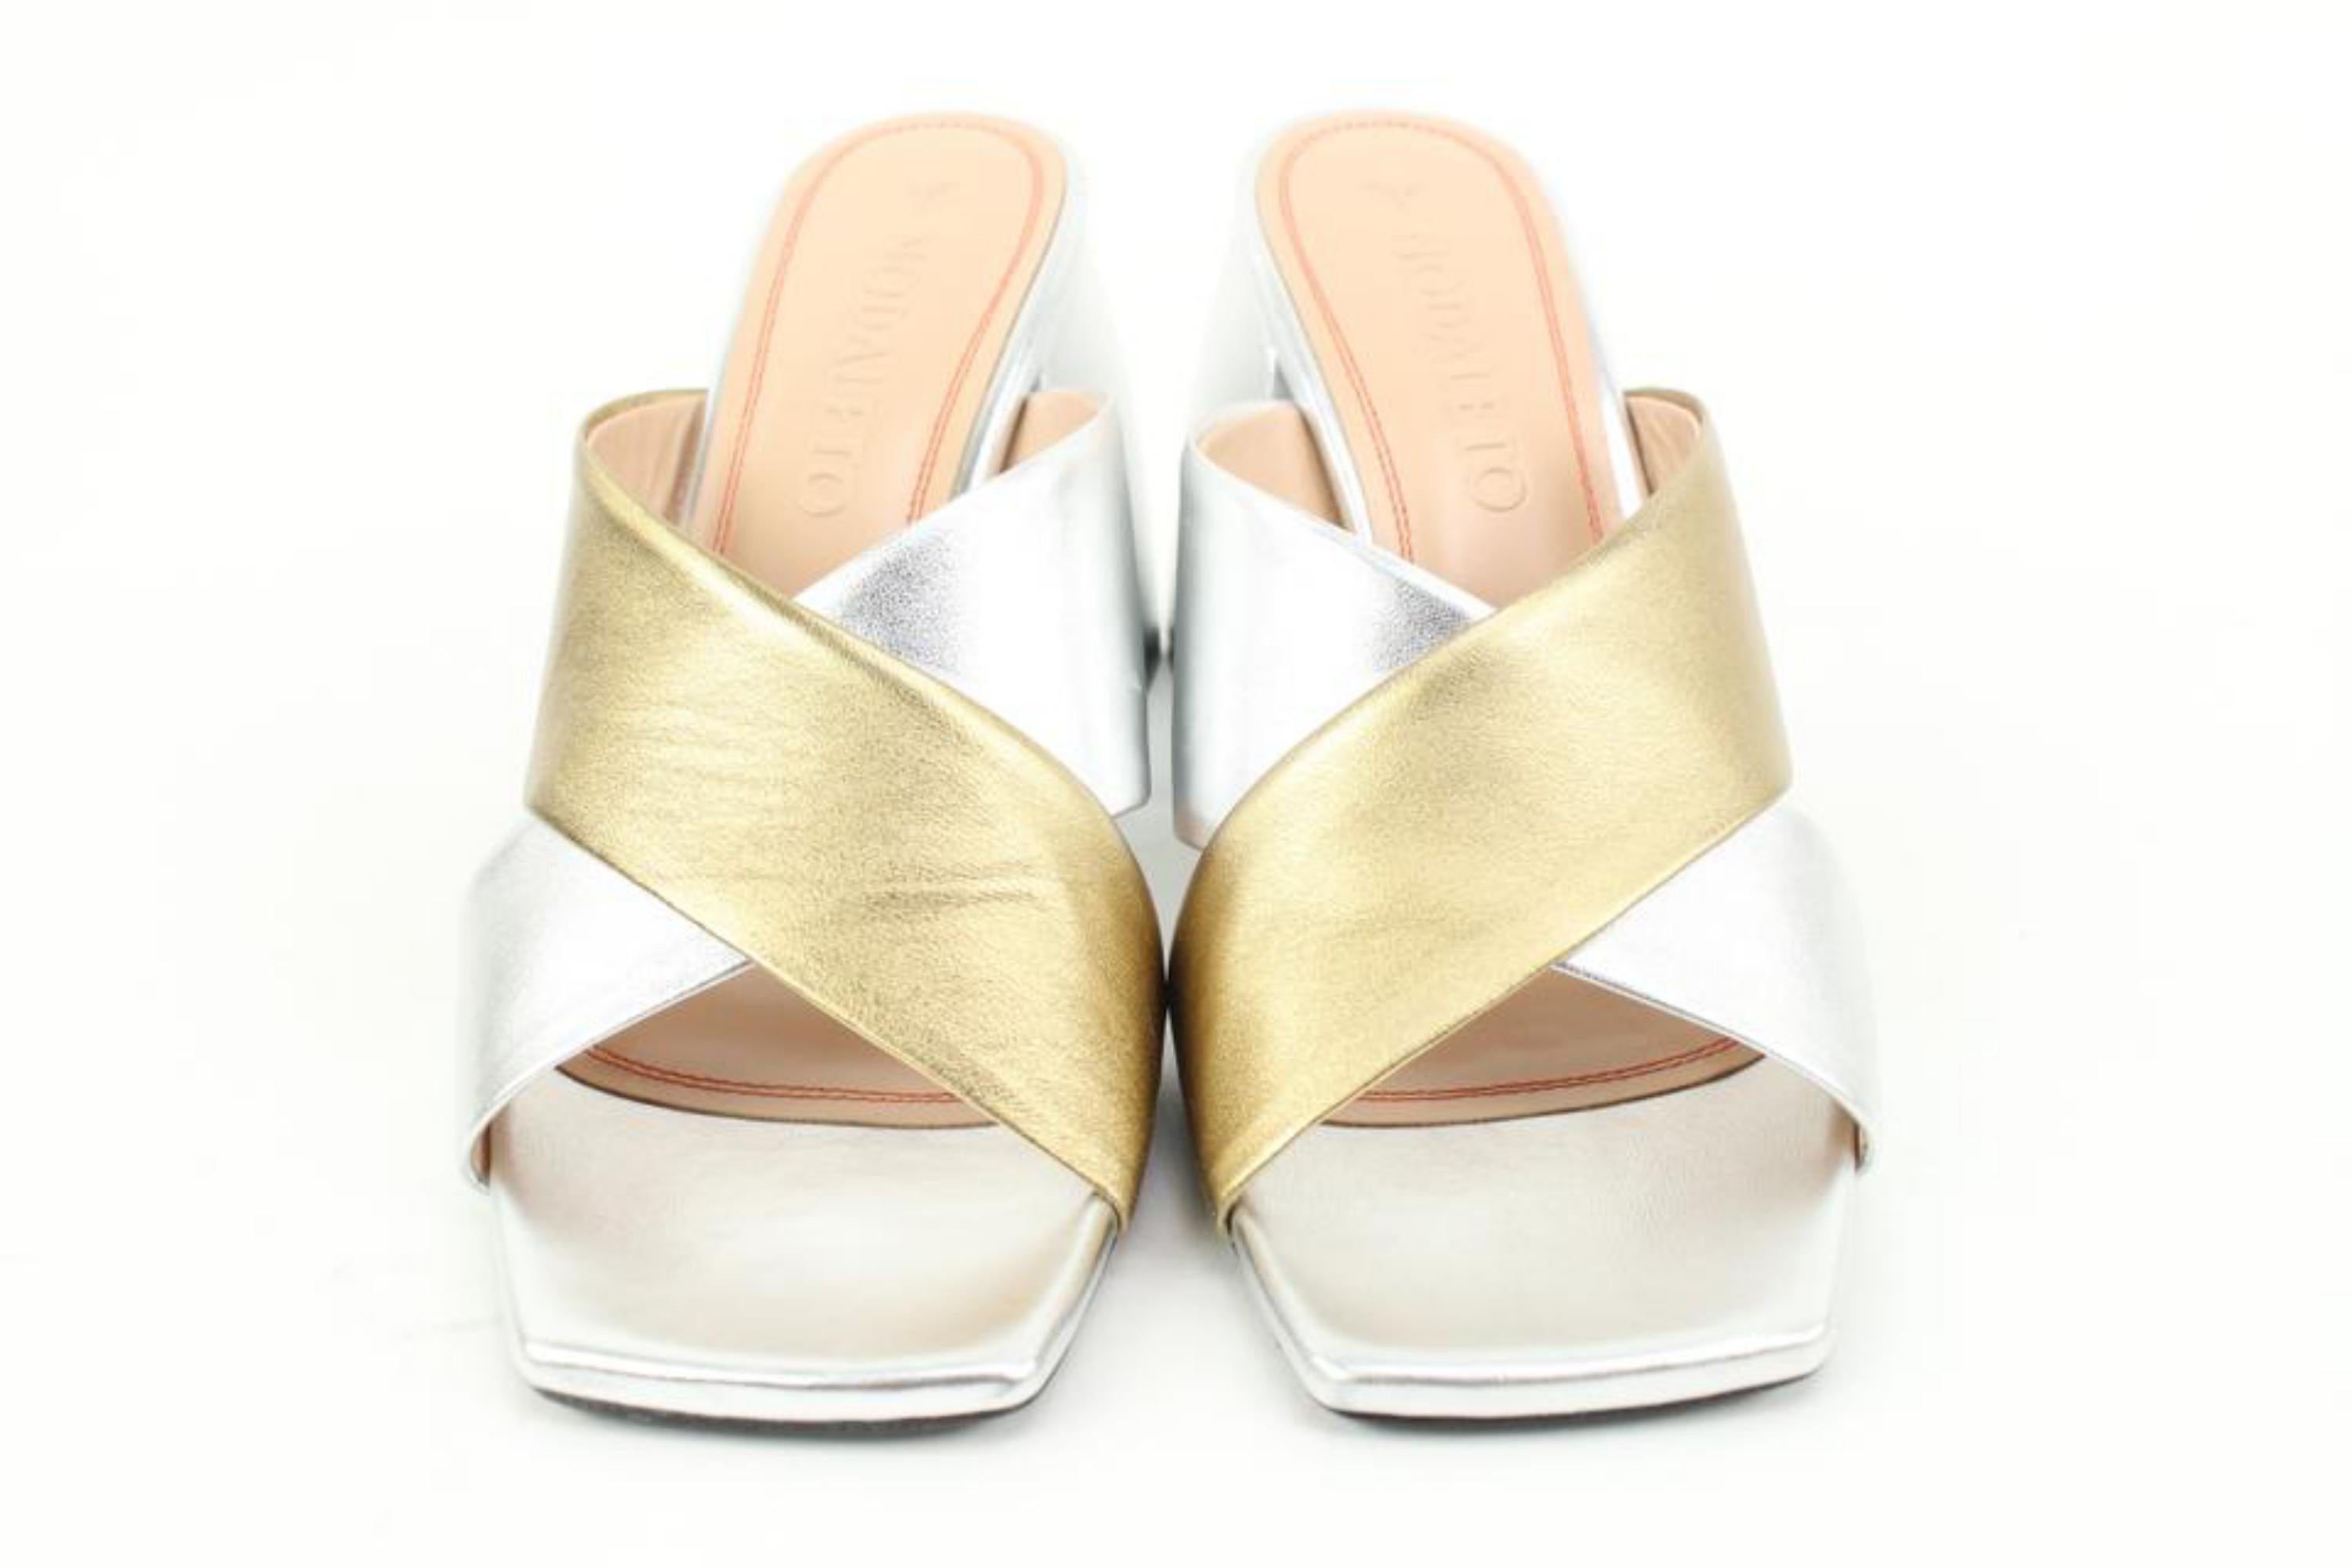 Nodaleto Size 39 Silver x Gold Leather Bulla Banks Block Heel Sandals 8no34s For Sale 2